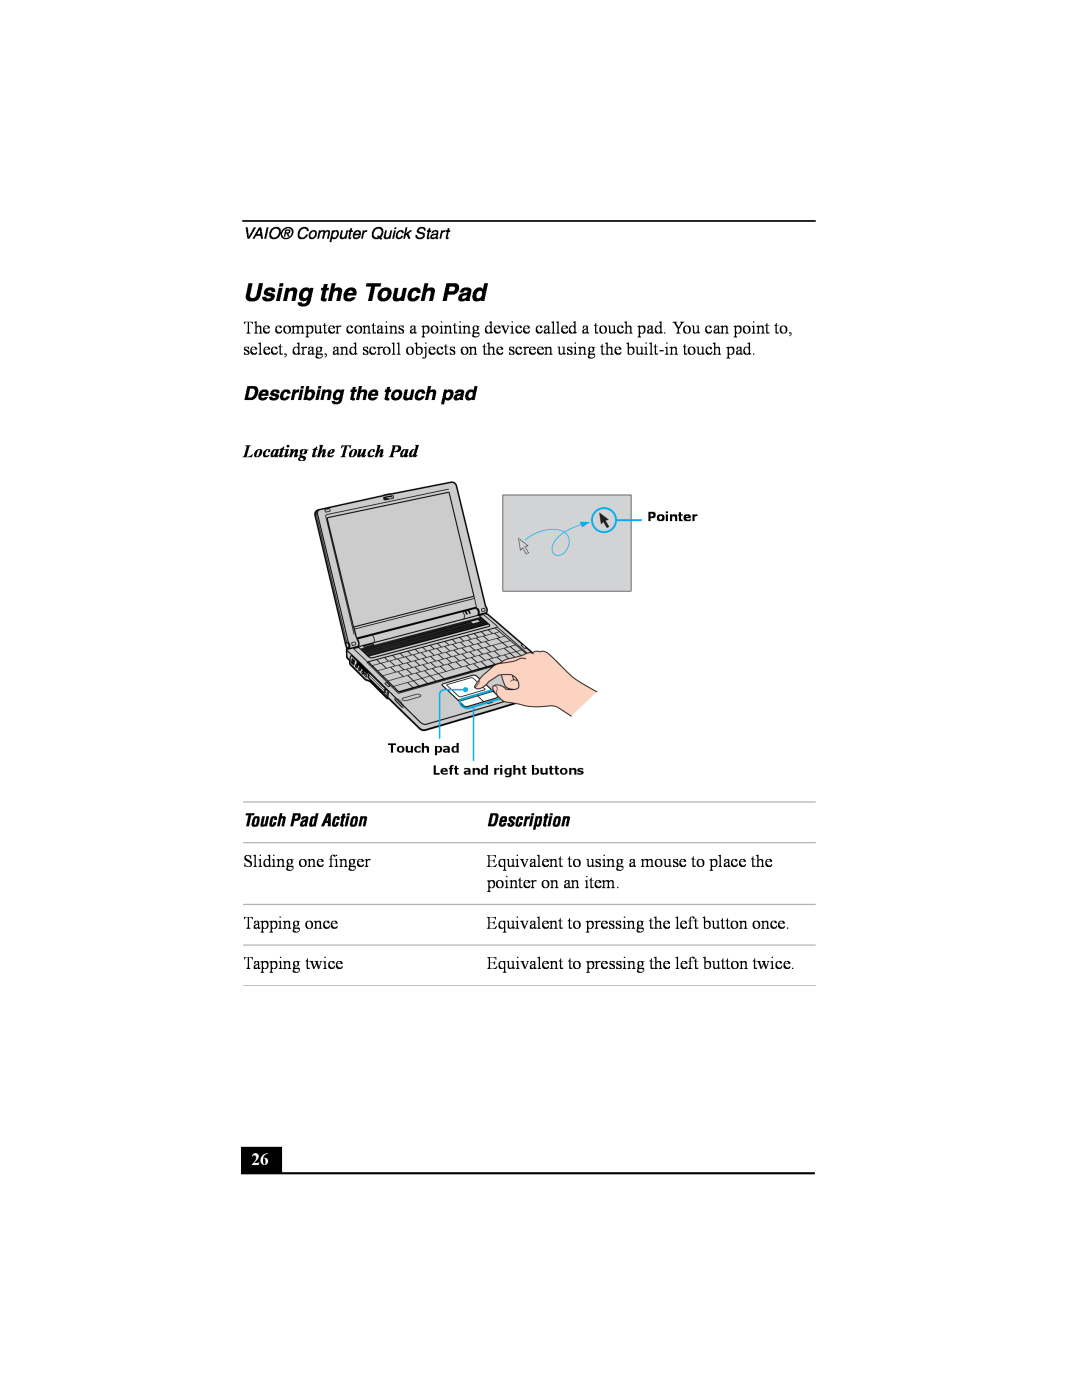 Sony PCG-FRV manual Using the Touch Pad, Describing the touch pad, Locating the Touch Pad, Description 